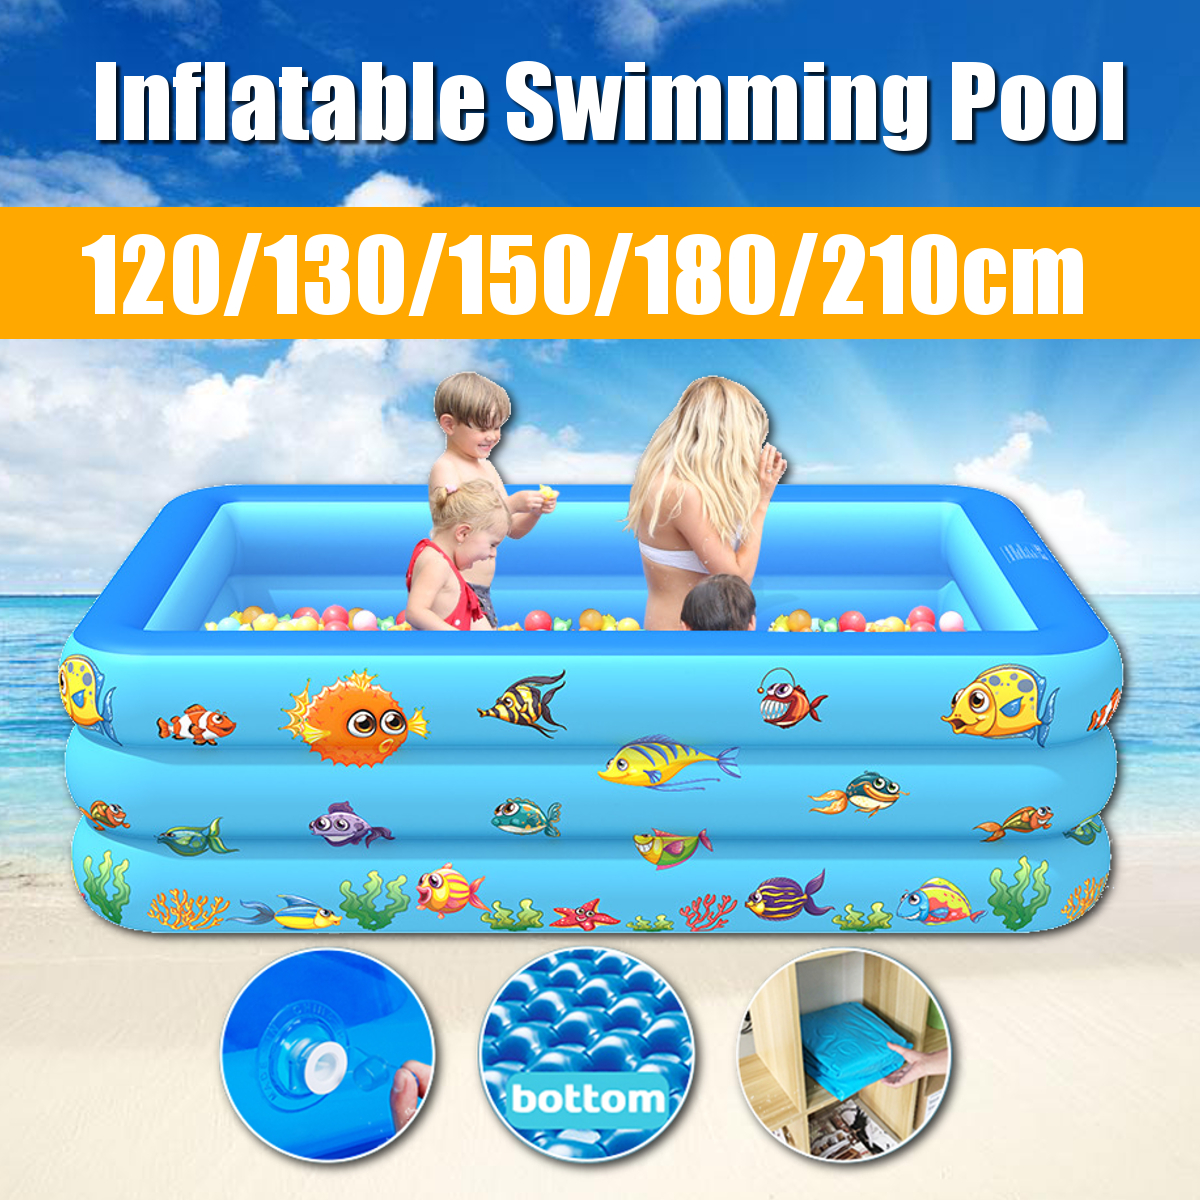 Inflatable-Swimming-Pool-Garden-Outdoor-PVC-Paddling-Pools-Kid-Game-Pool-1707398-1